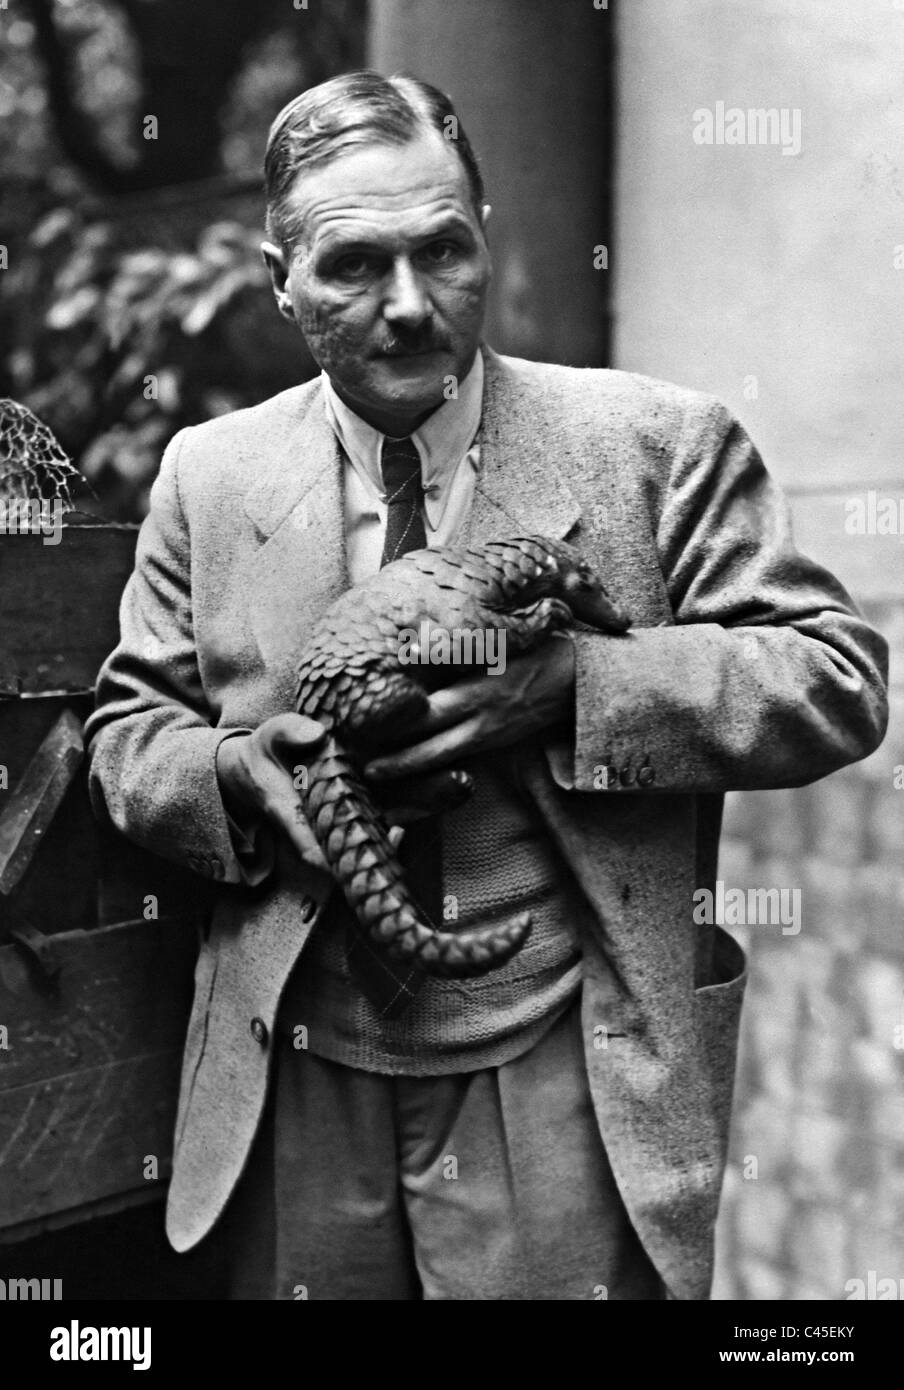 Lutz Heck with a scaly anteater, 1940 Stock Photo